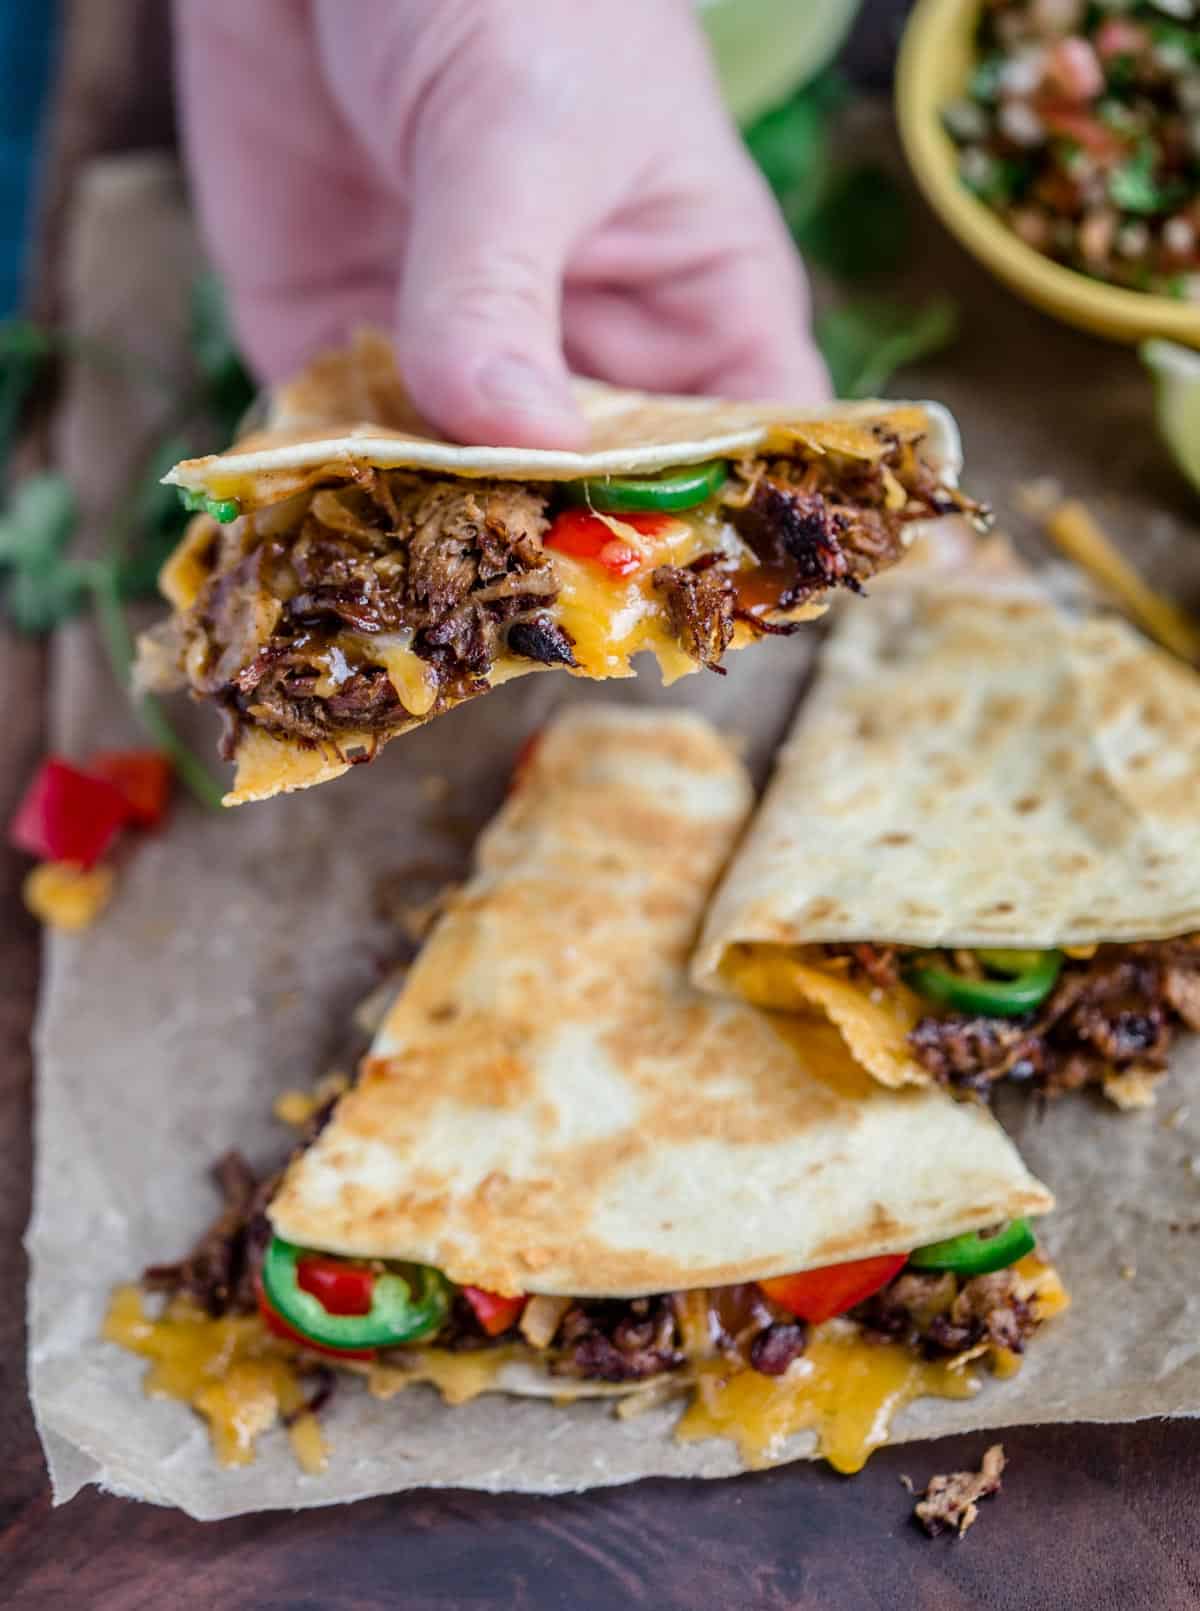 Holding beef quesadillas before eating.